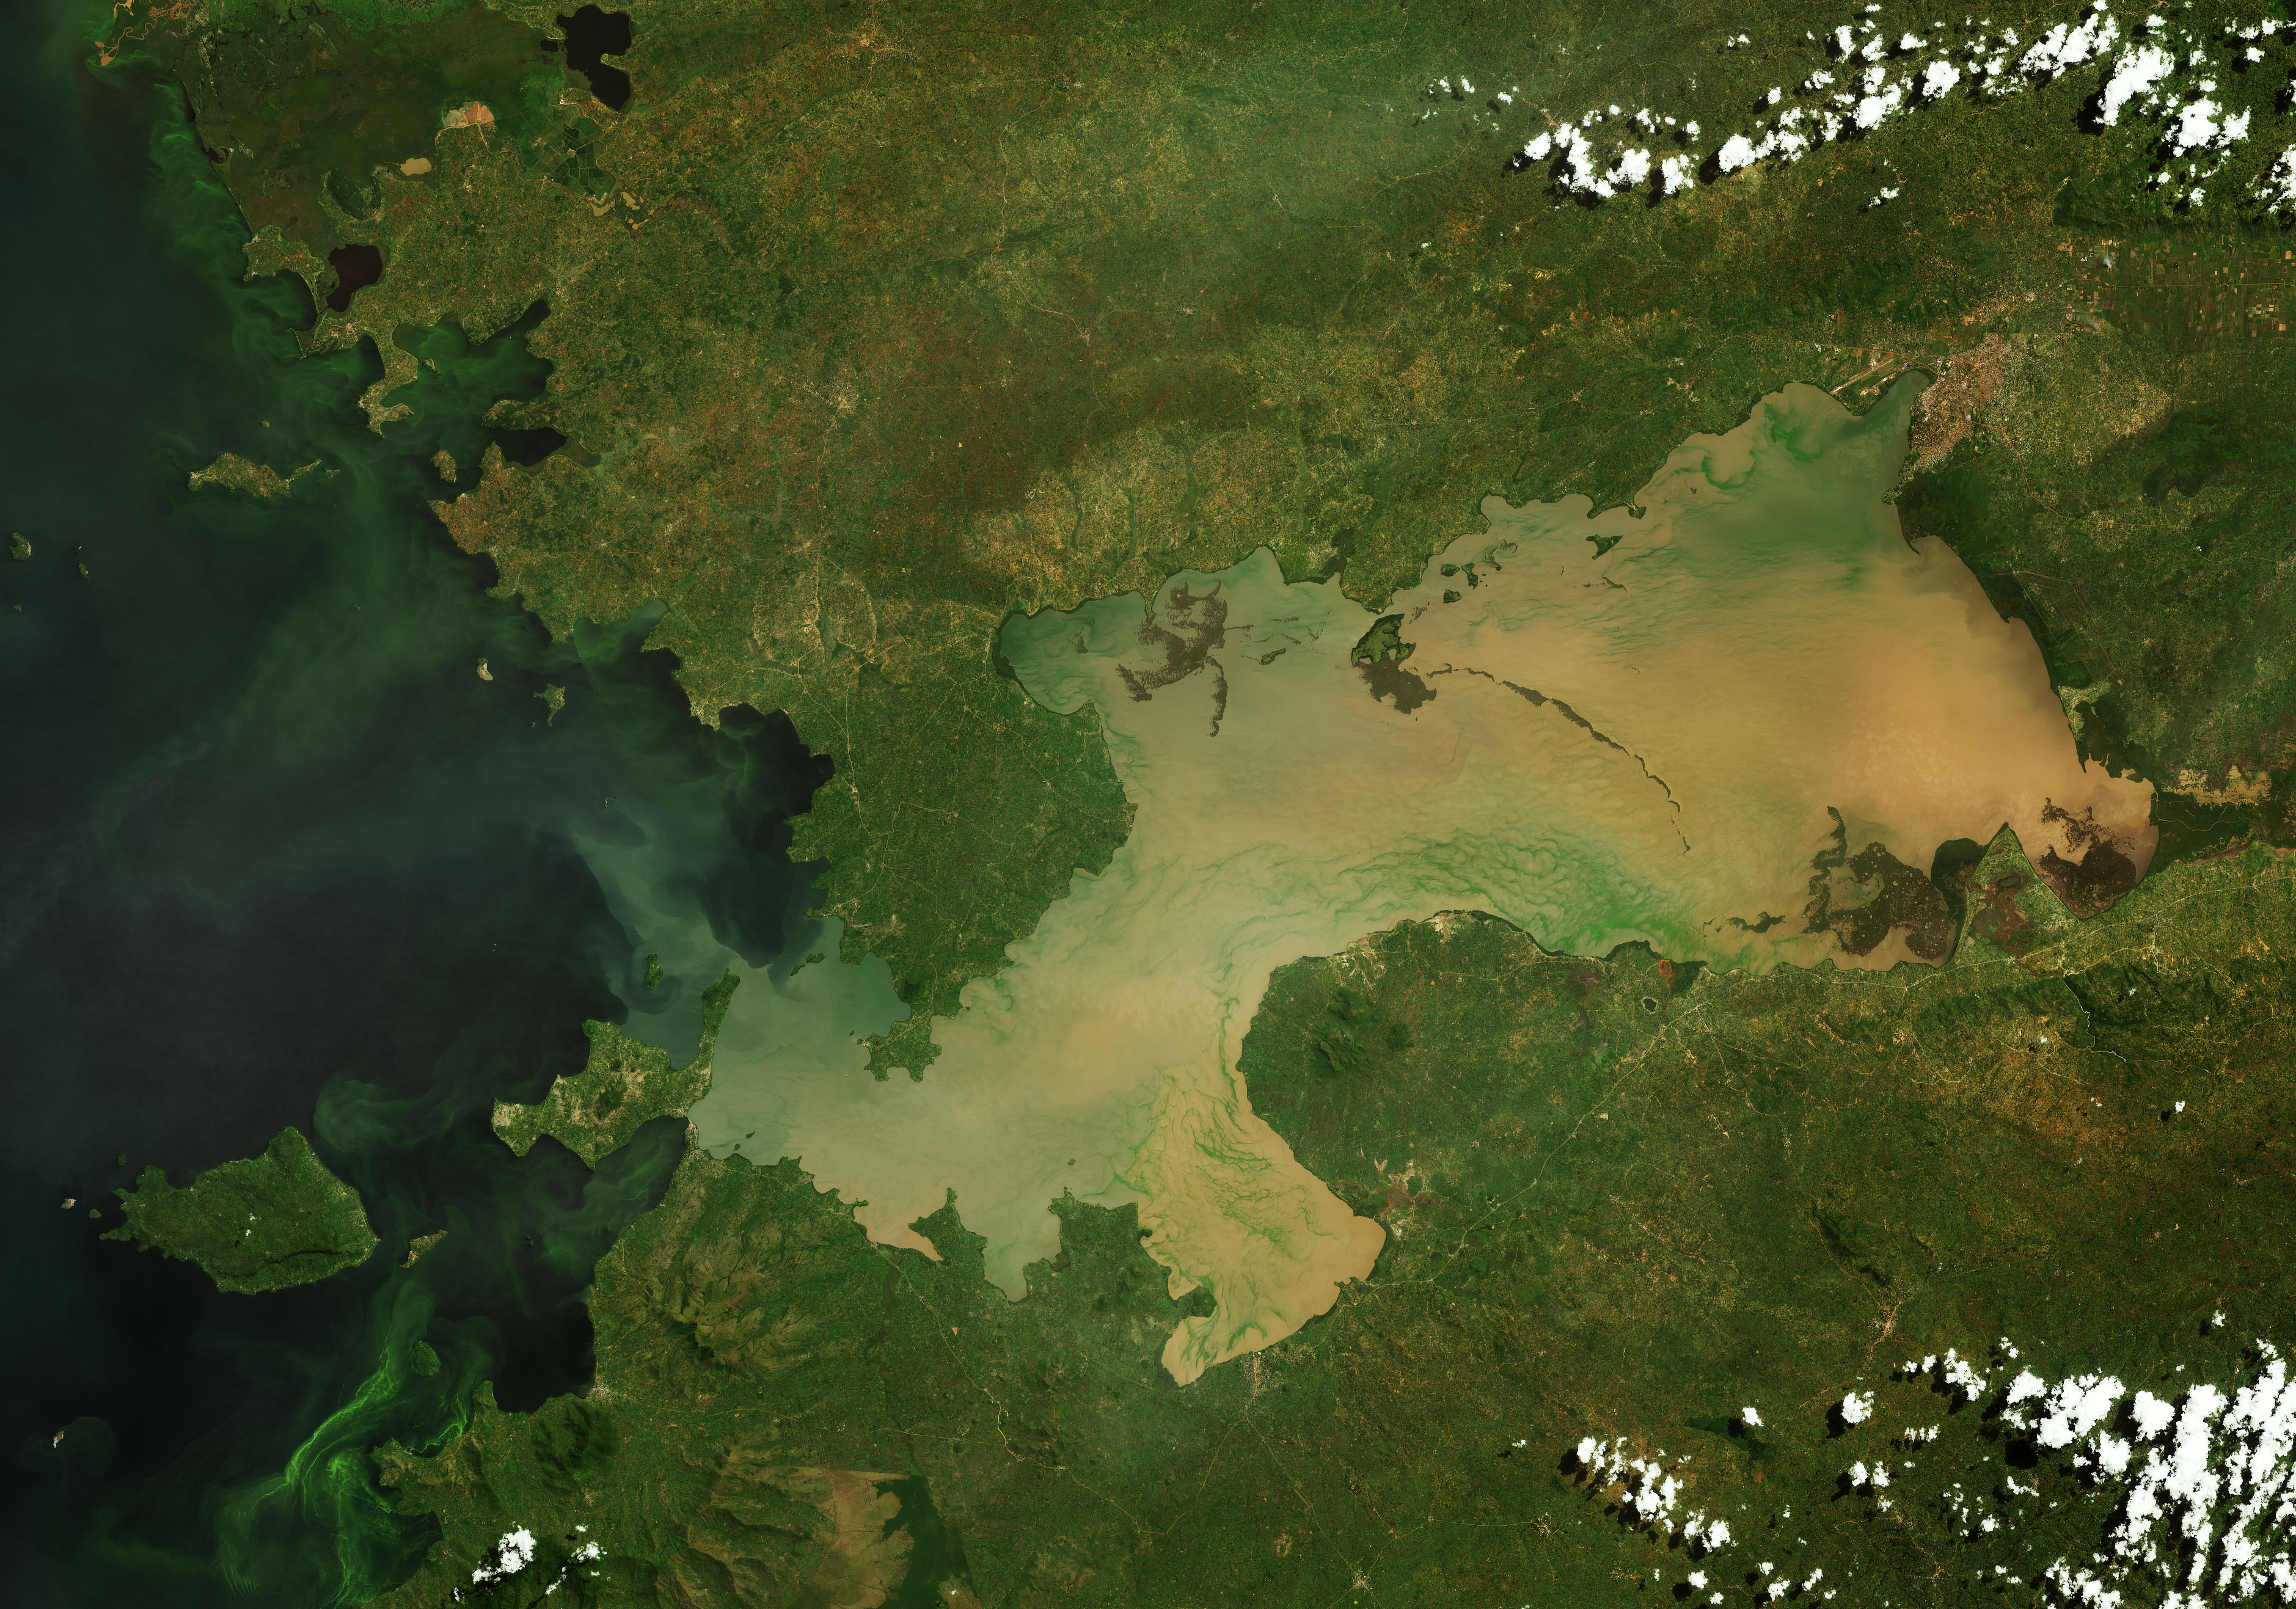 Lake Victoria’s Rising Waters - related image preview